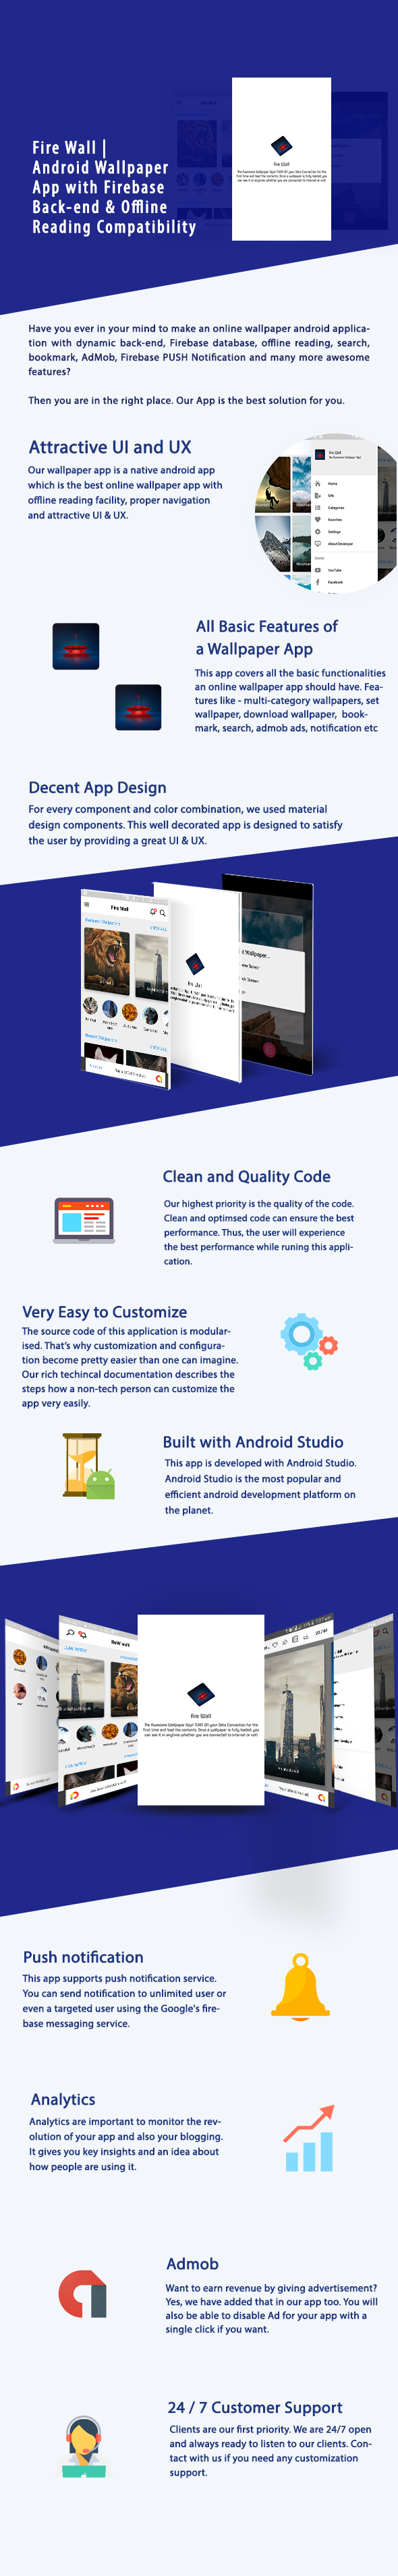 https://graphql.code.market/wp-content/uploads/2020/10/1603408028_122_Fire-Wall-Native-Android-HD-Wallpaper-App-with-Firebase.png